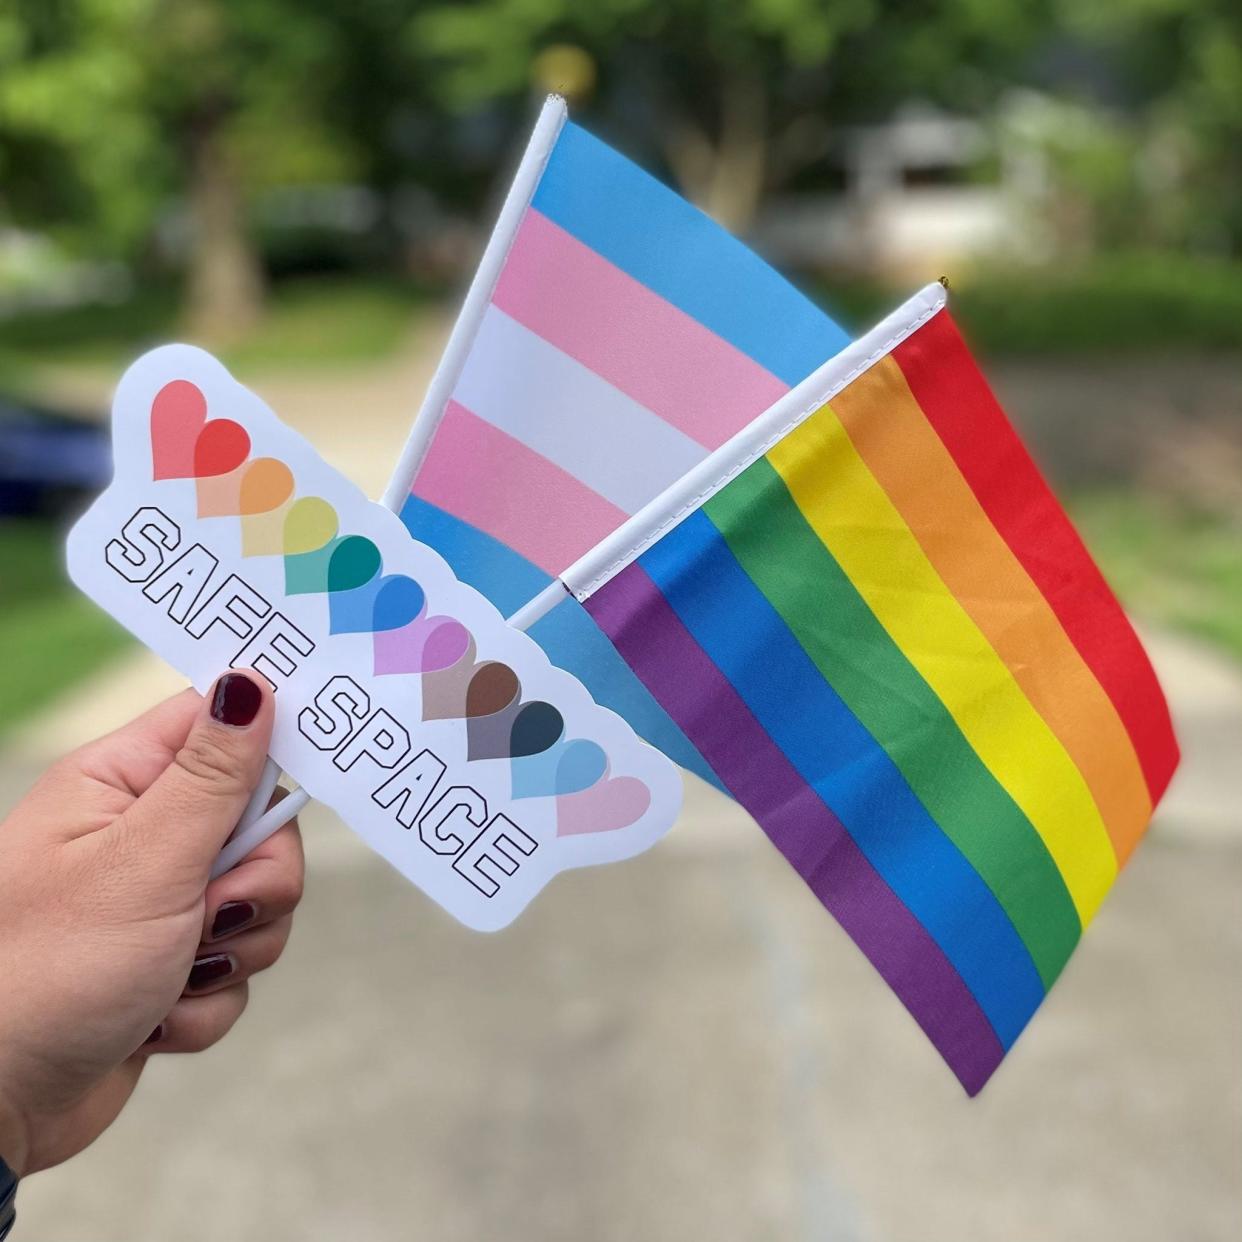 An image of Pride flags, buttons and Safe Space stickers provided by PFLAG, an organization dedicated to supporting, educating, and advocating for LGBTQ+ people.